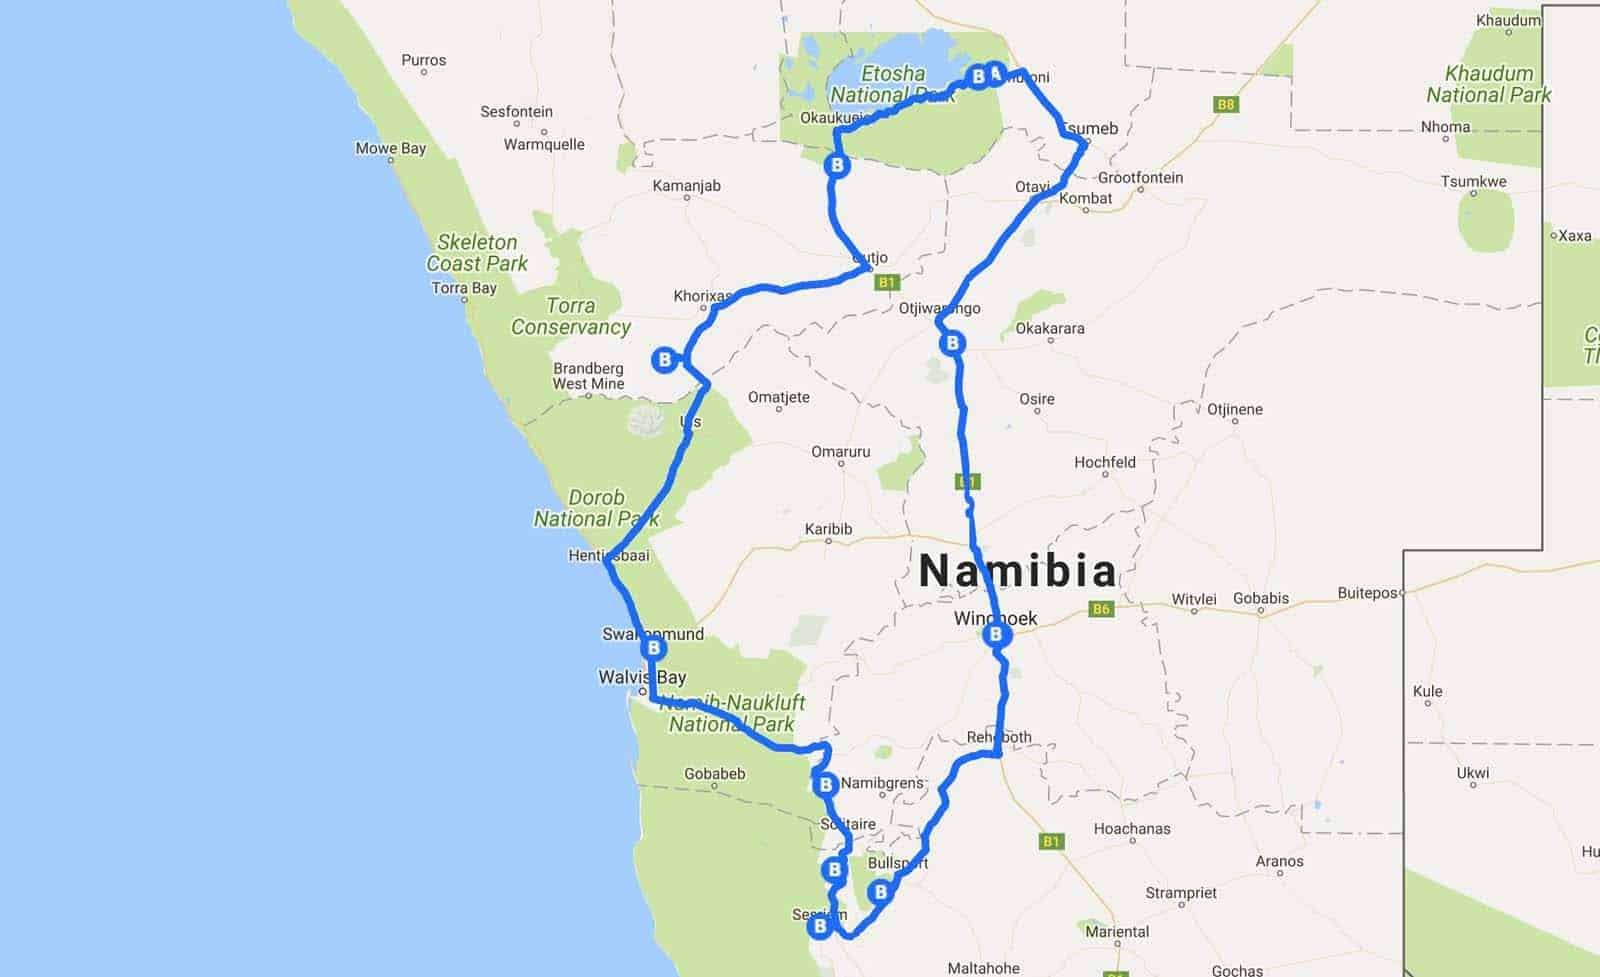 road trip from johannesburg to namibia